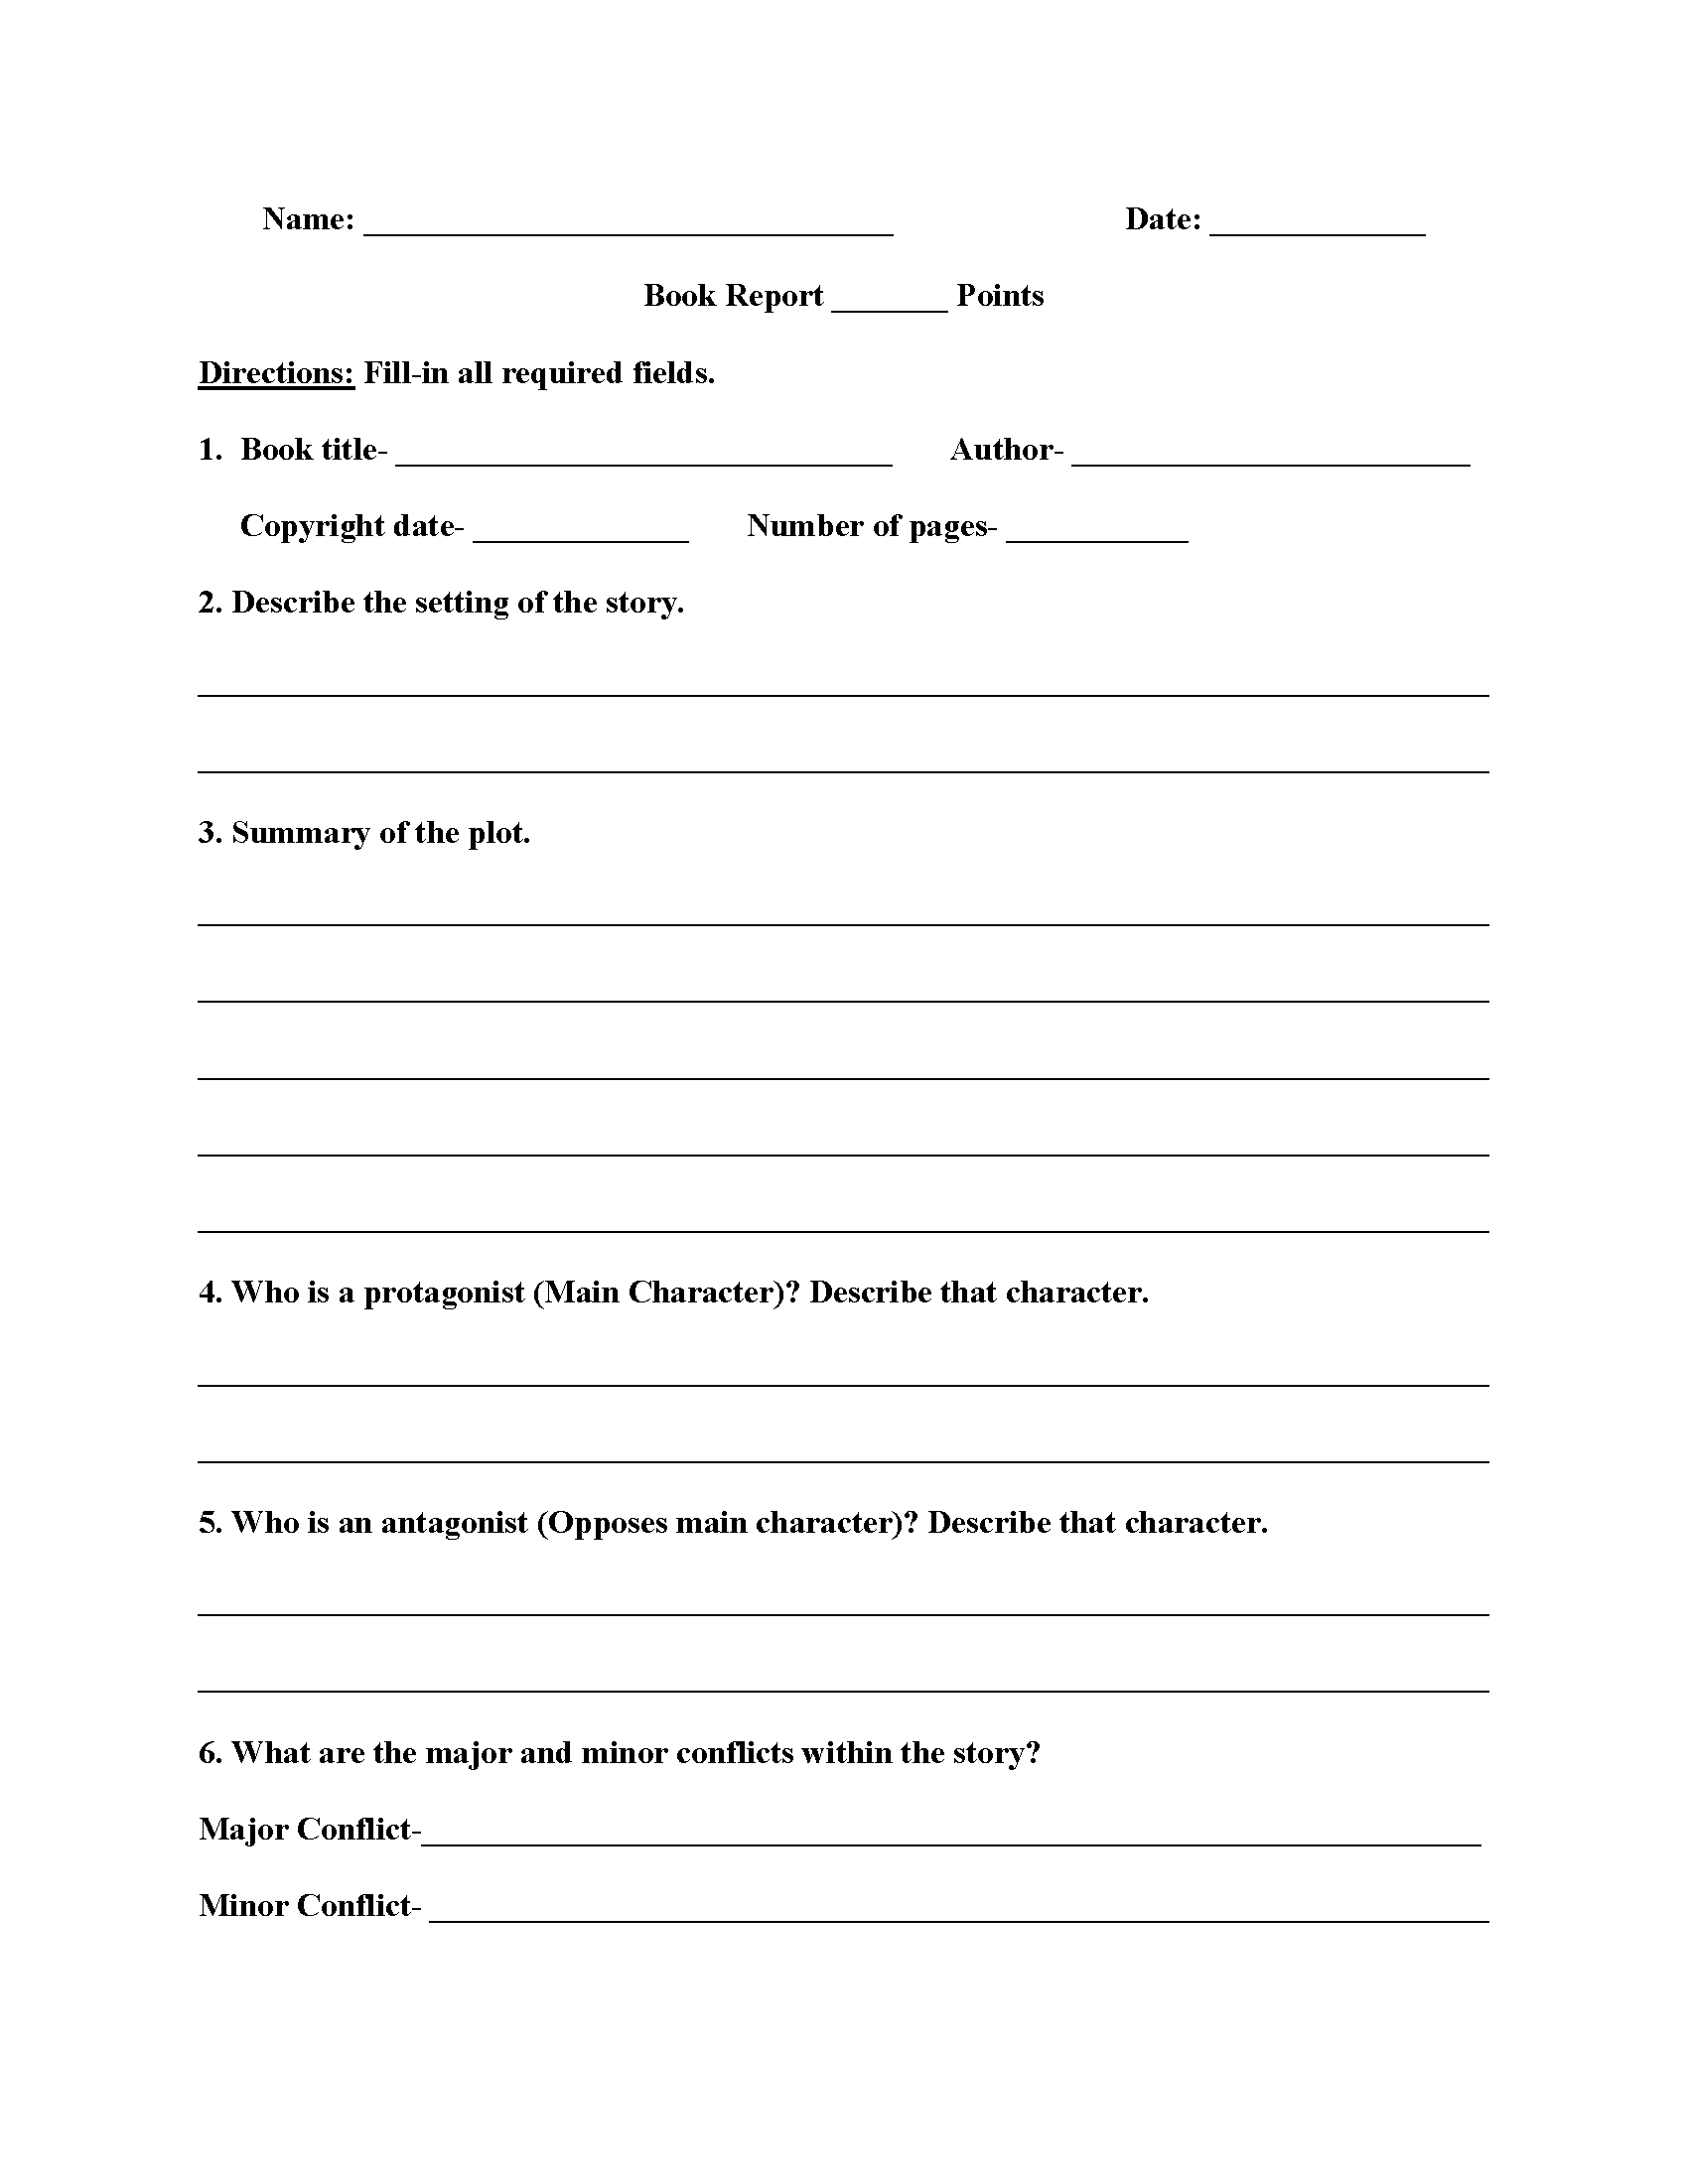 High School Book Report Worksheets | Education | High School With Regard To High School Book Report Template